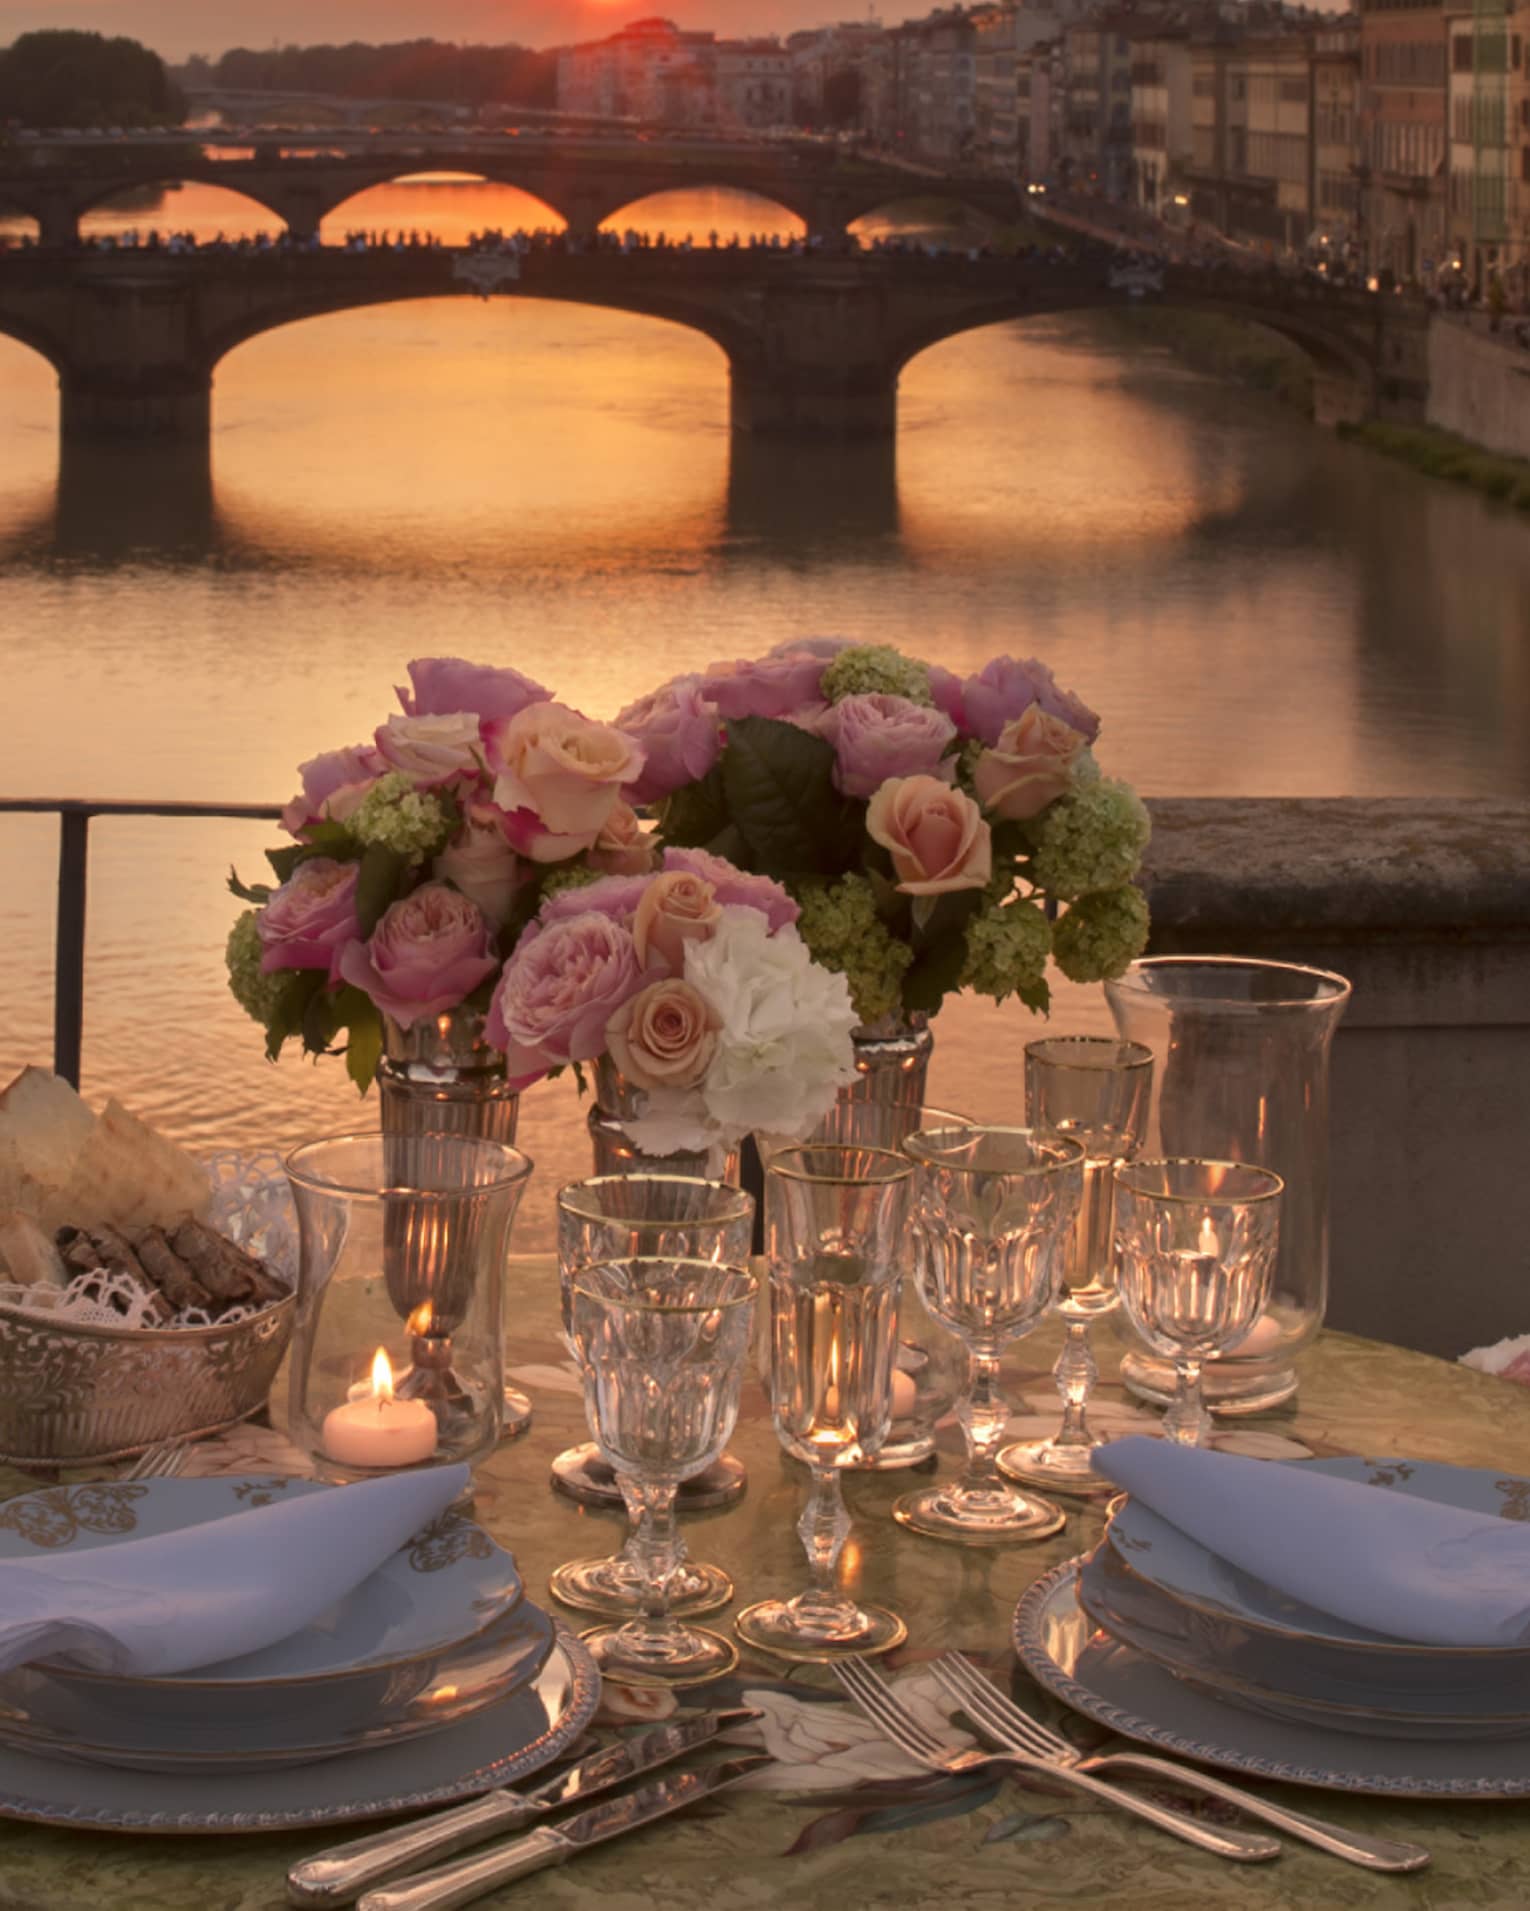 Pink roses in vases on formal dining table on bridge overlooking canal, sunset